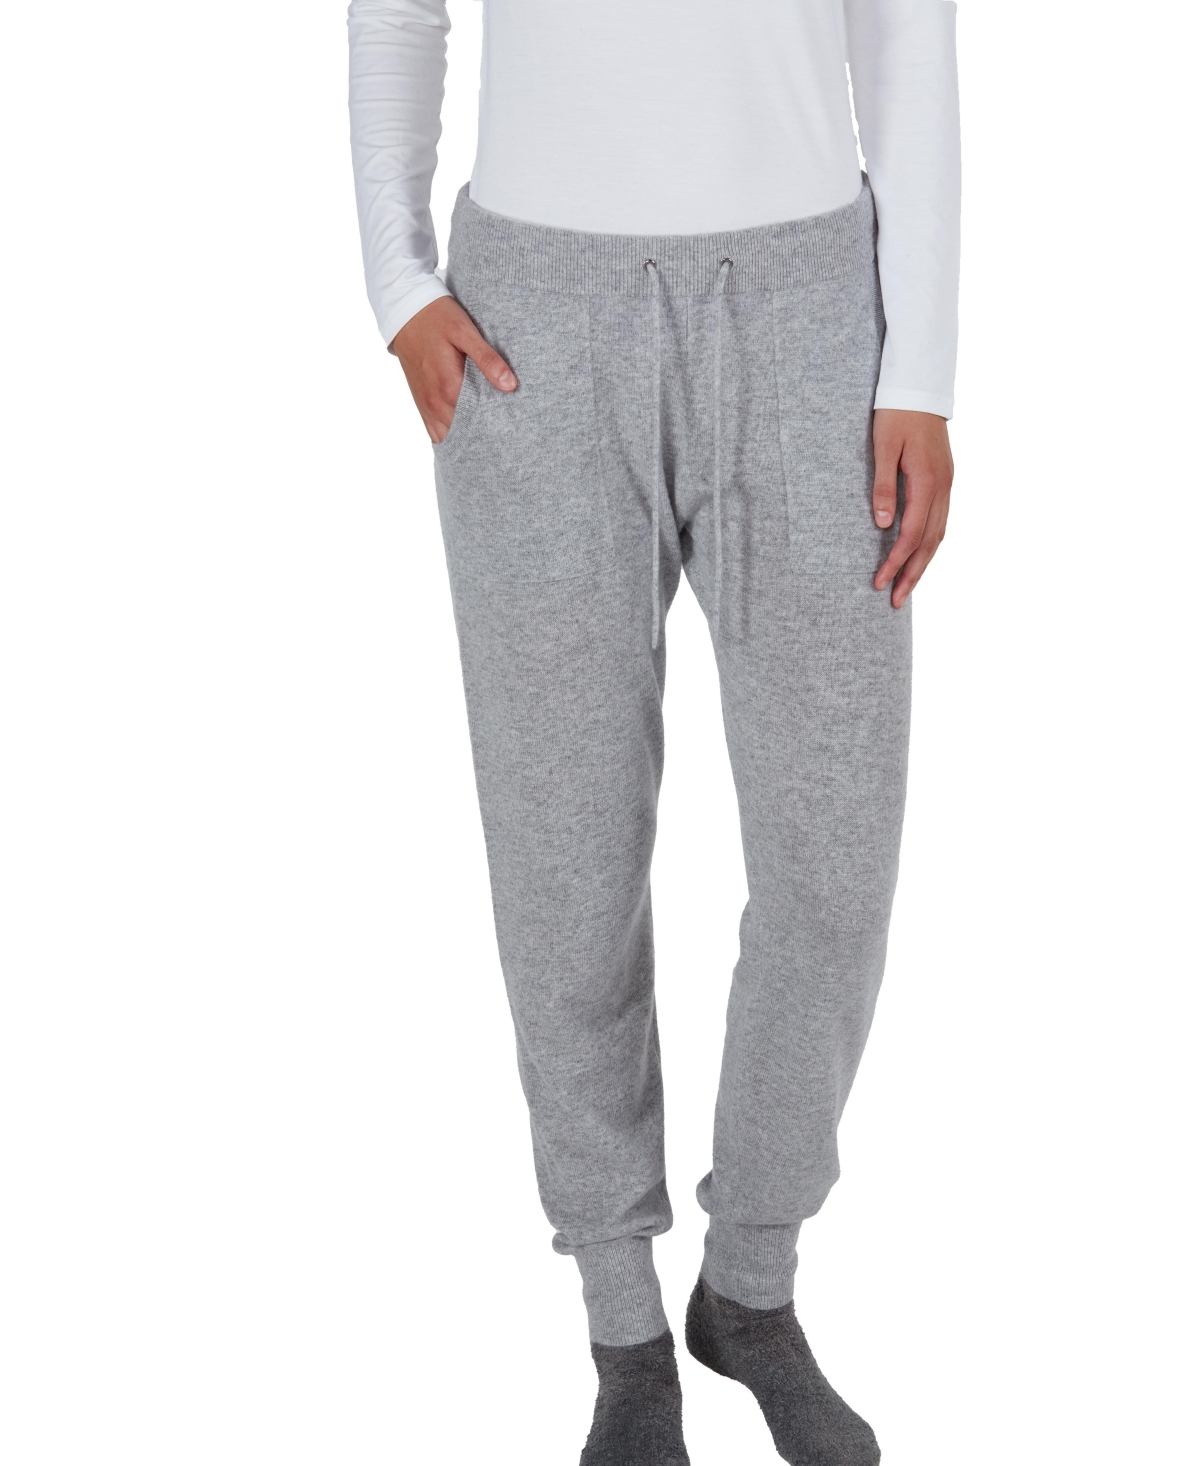 Women's 100% Pure Cashmere Knitted Jogger Pants - Grey